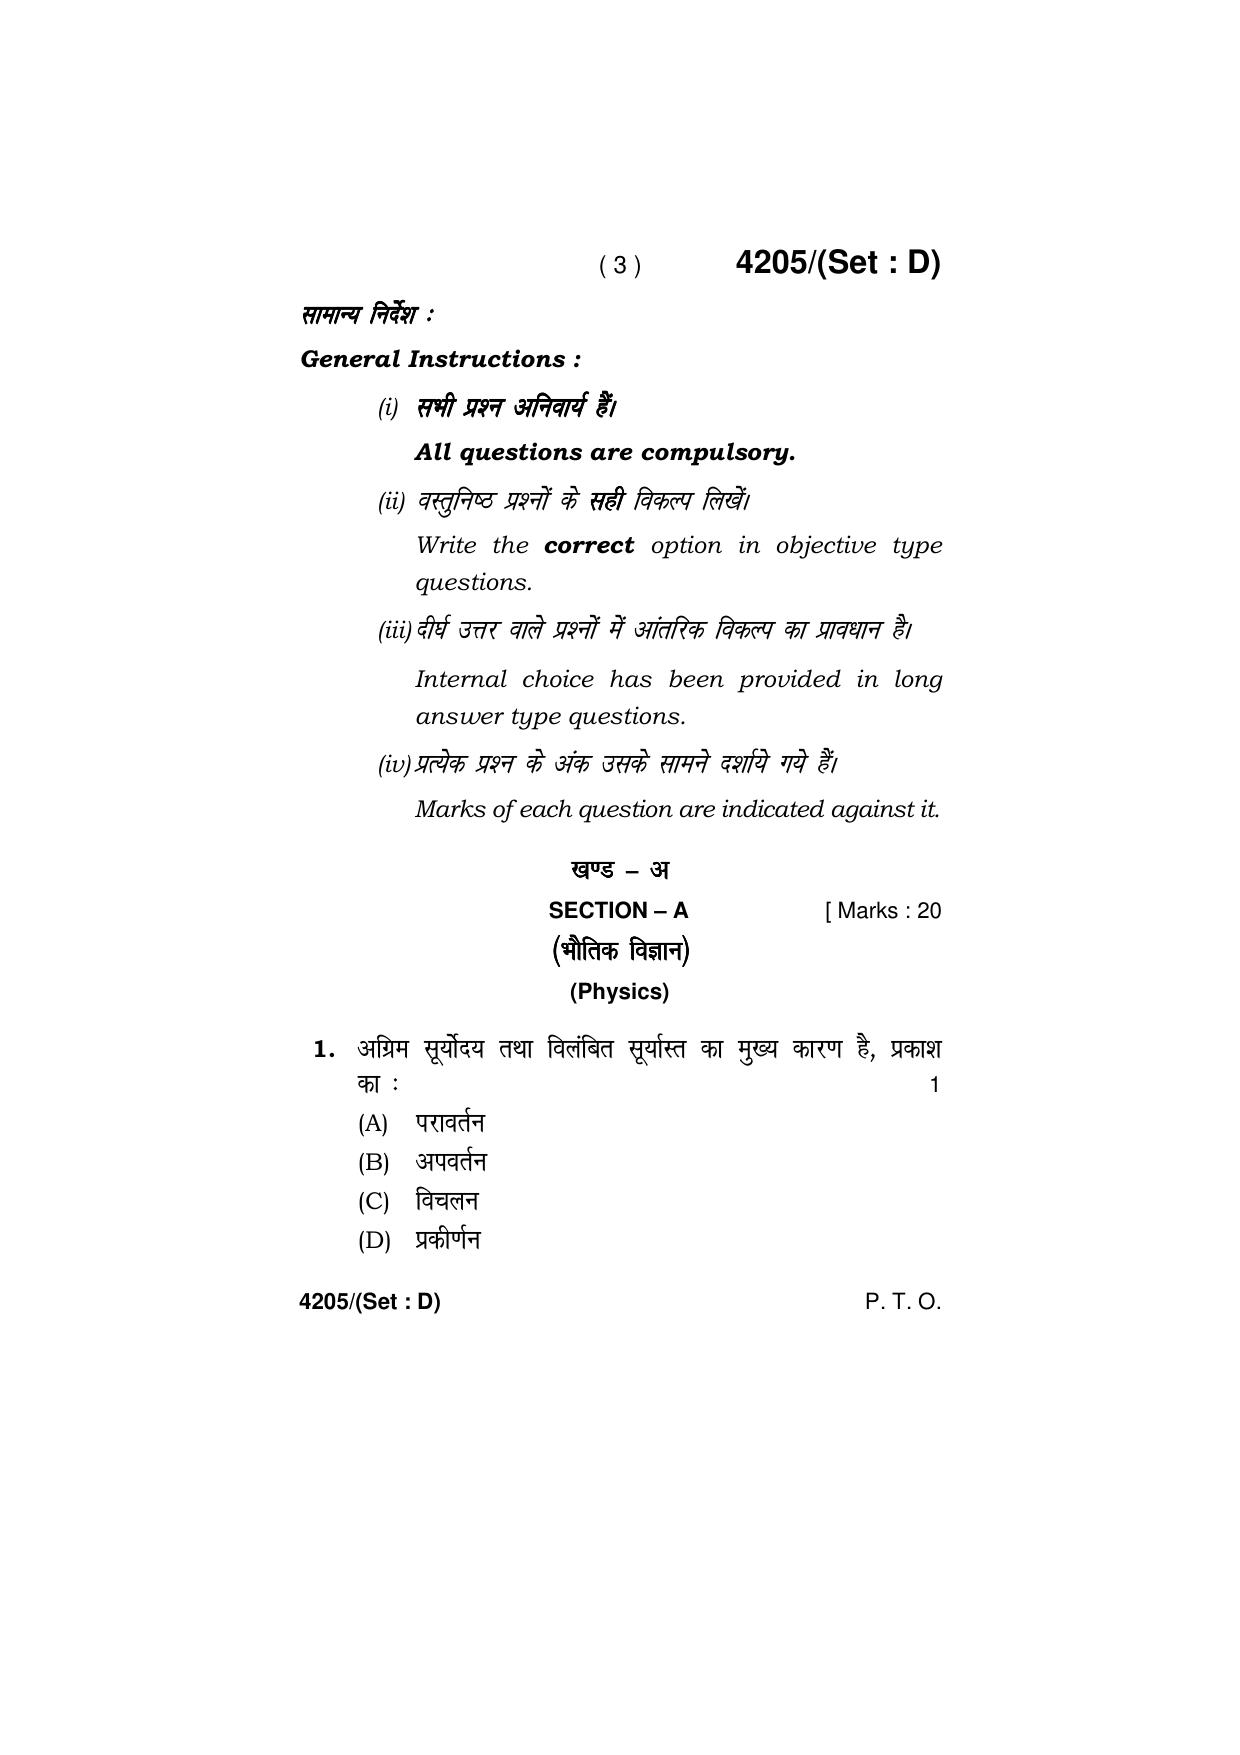 Haryana Board HBSE Class 10 Science (All Set) 2019 Question Paper - Page 51